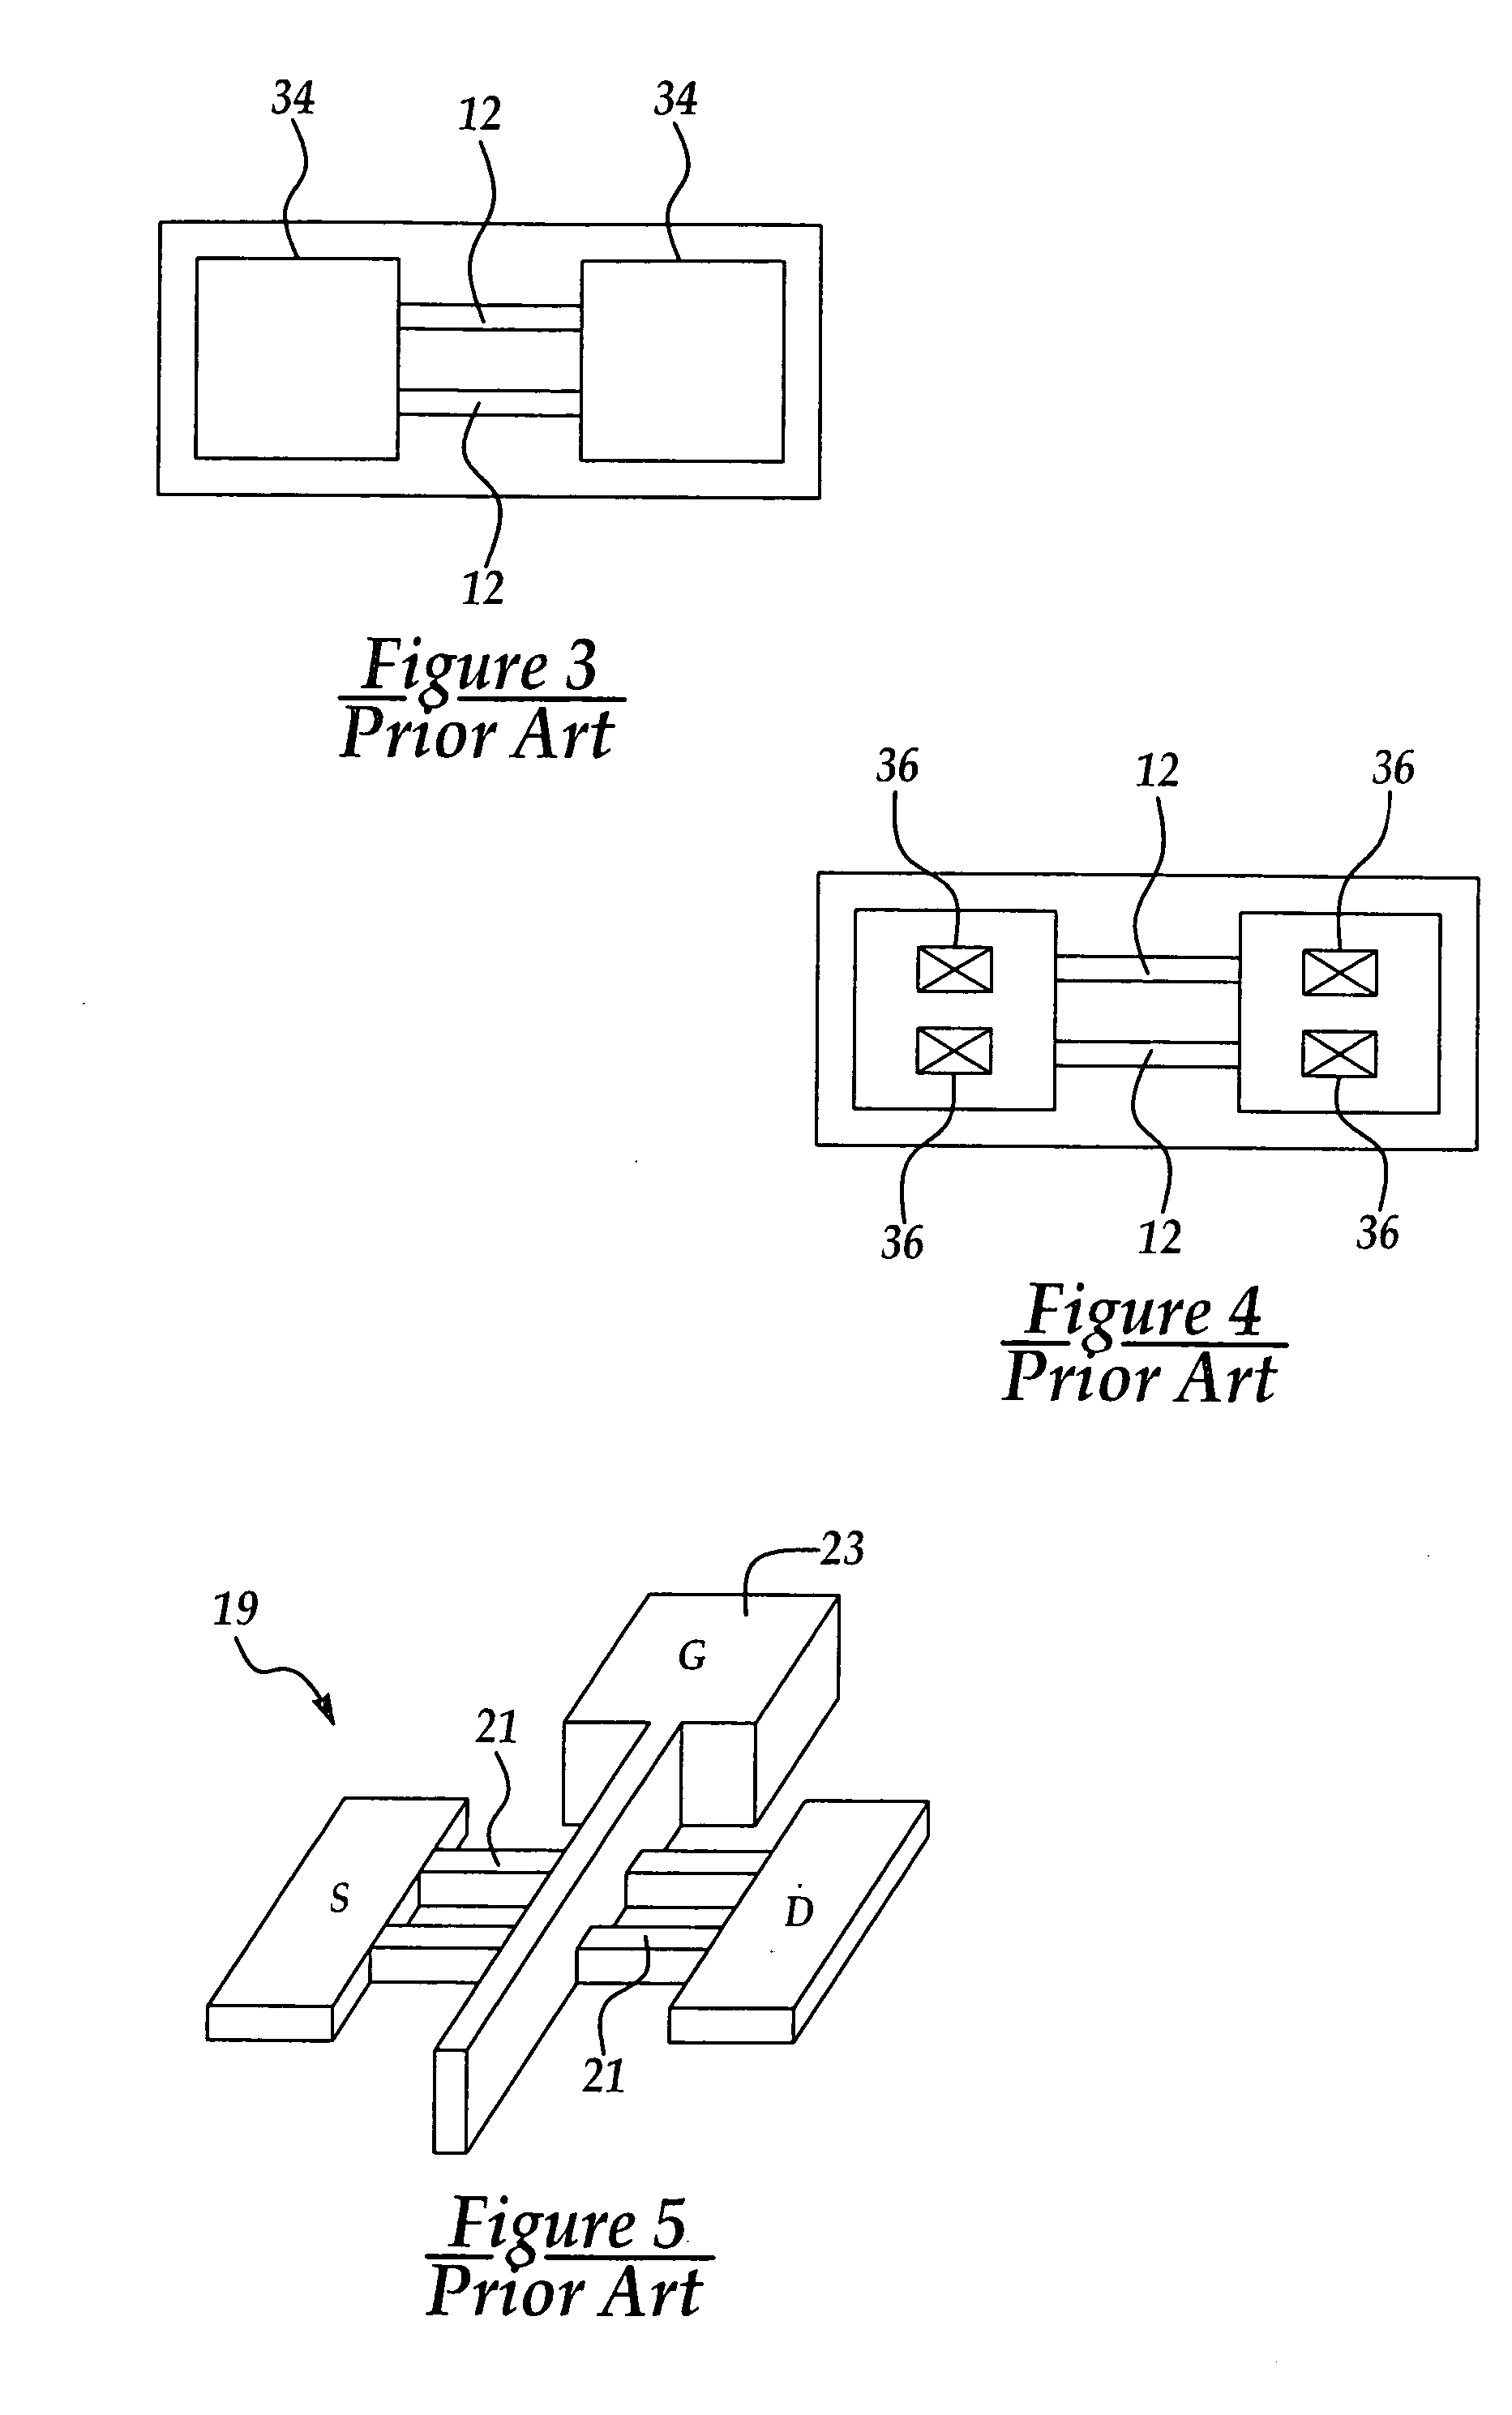 FinFET transistor device on SOI and method of fabrication